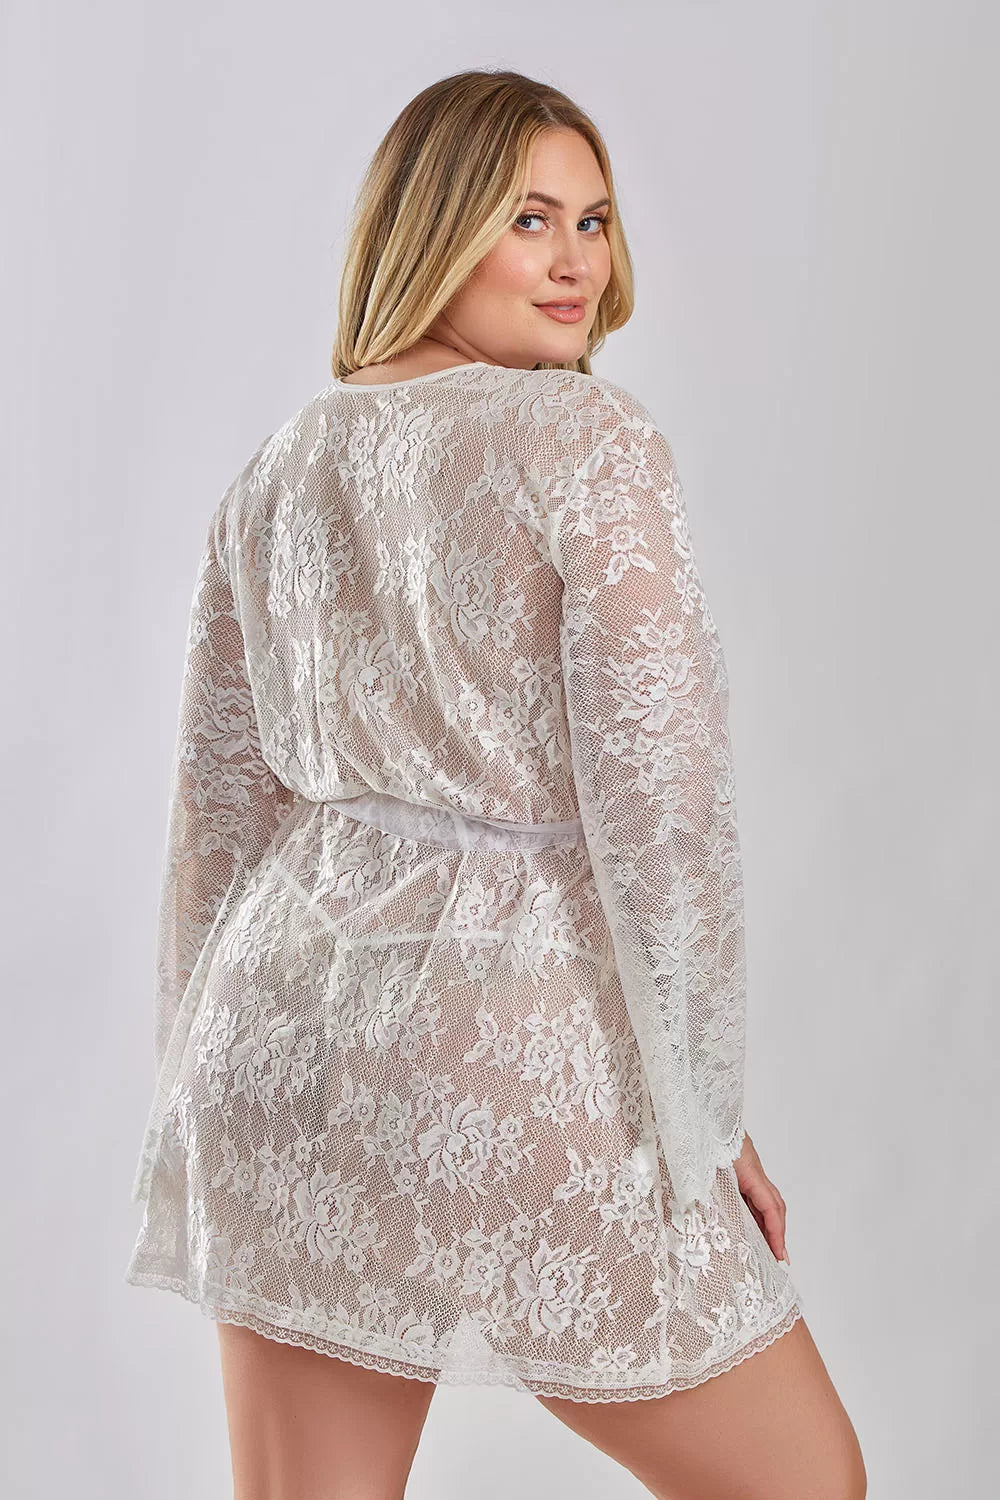 Scallop Edge Lace Robe from iCollection at Belle Lacet Lingerie